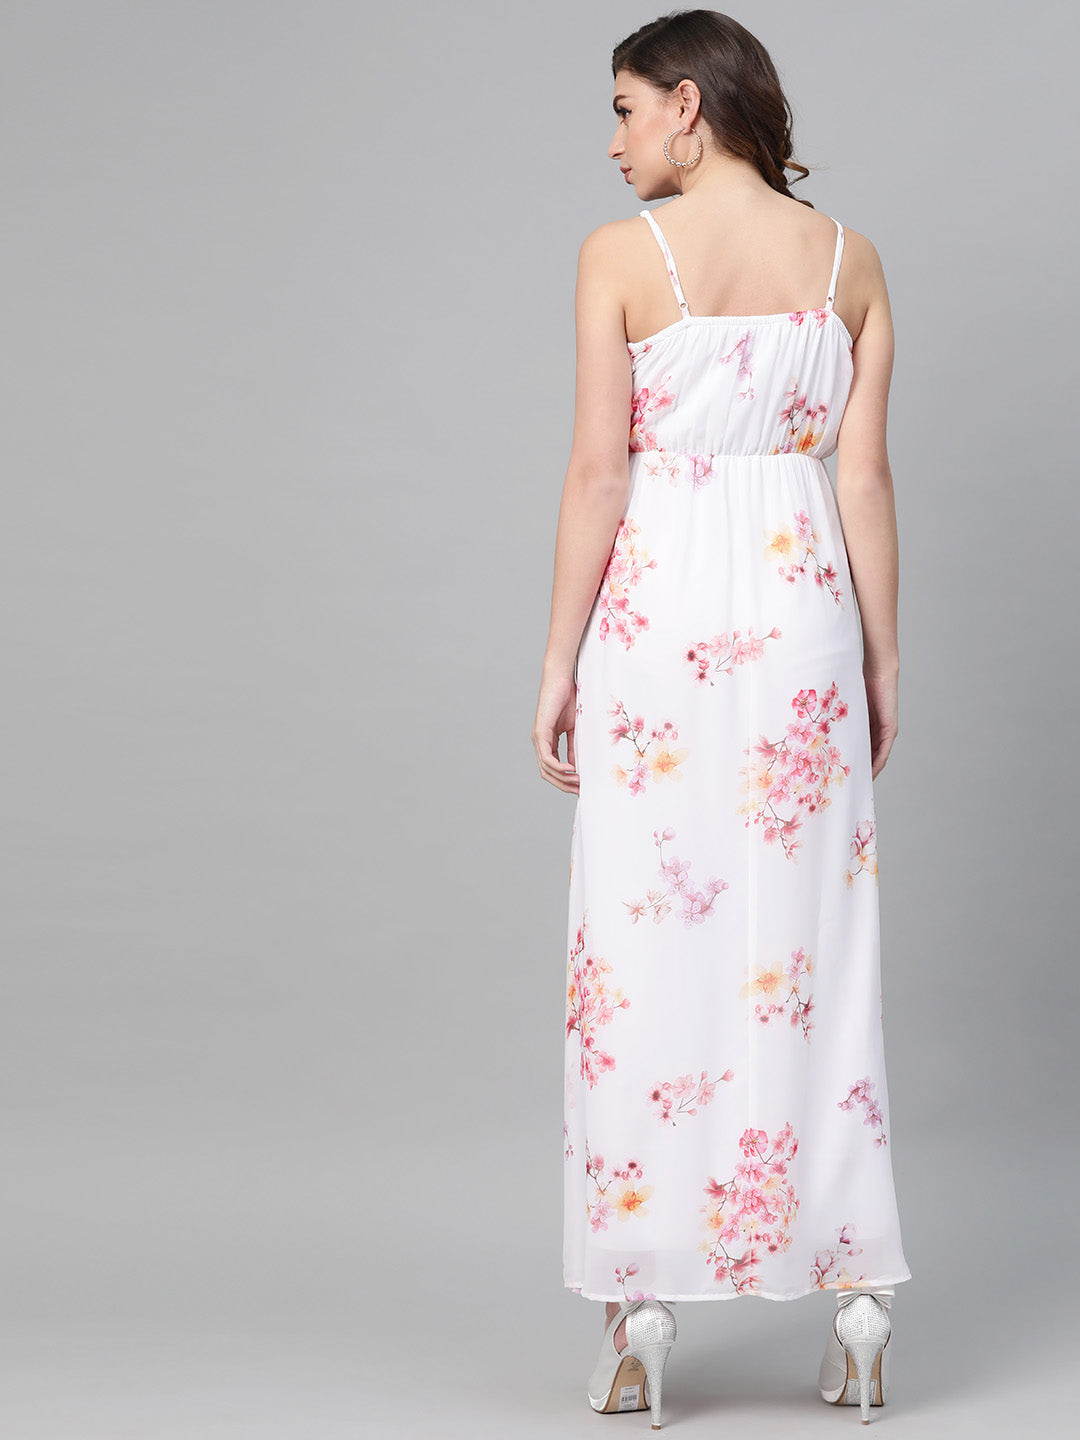 Off-White Floral Strappy Maxi Dress